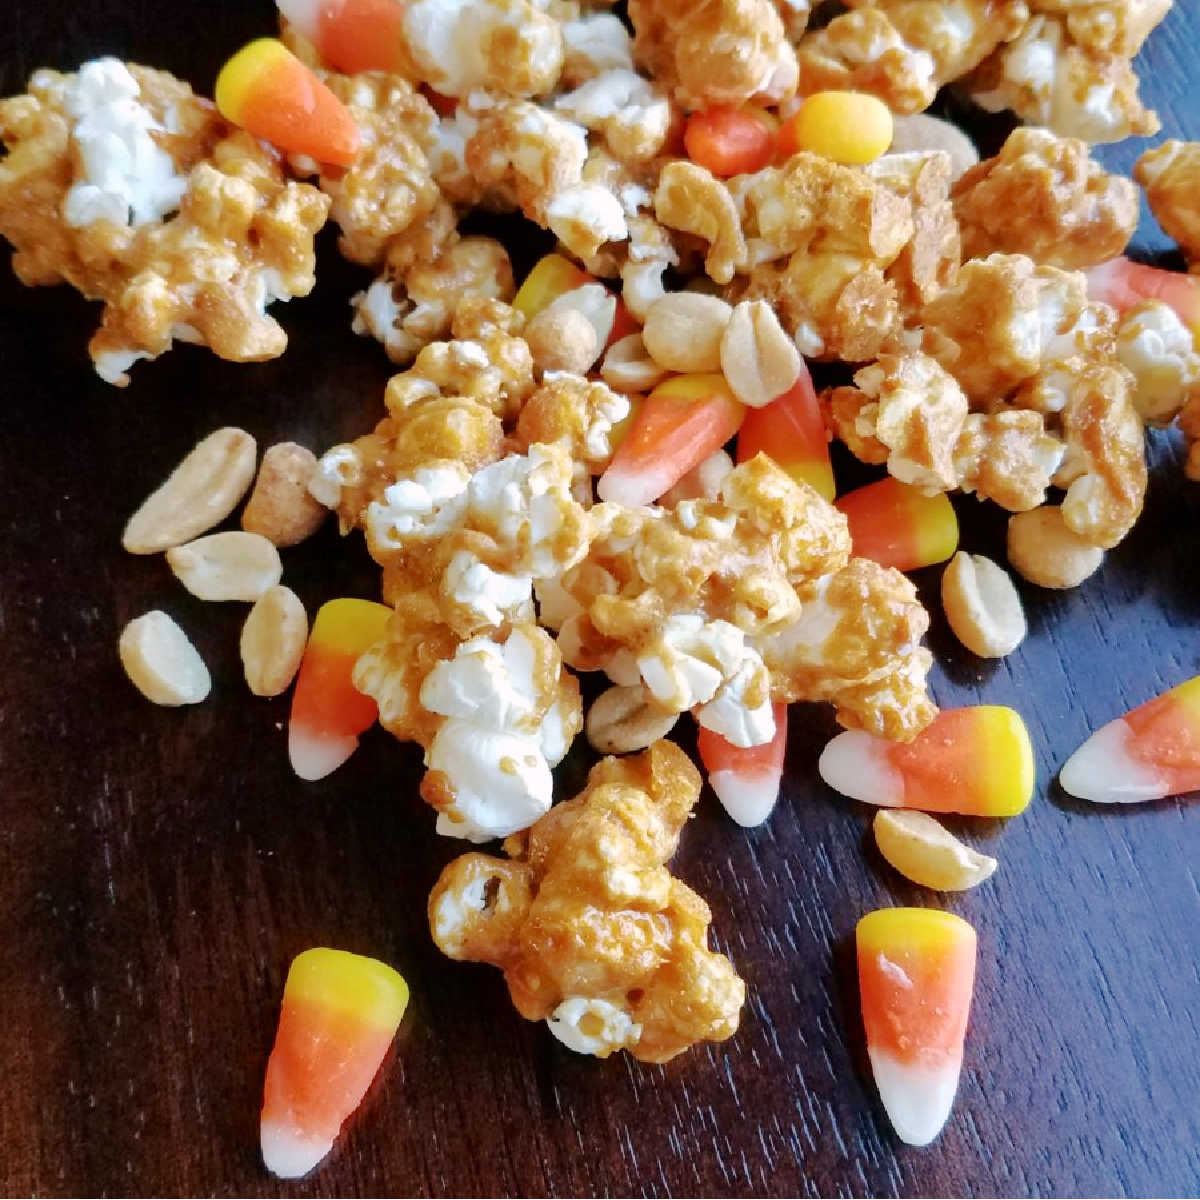 Crunchy peanut butter popcorn mixed with peanuts and candy corn for a fun hillbilly hash snack mix.